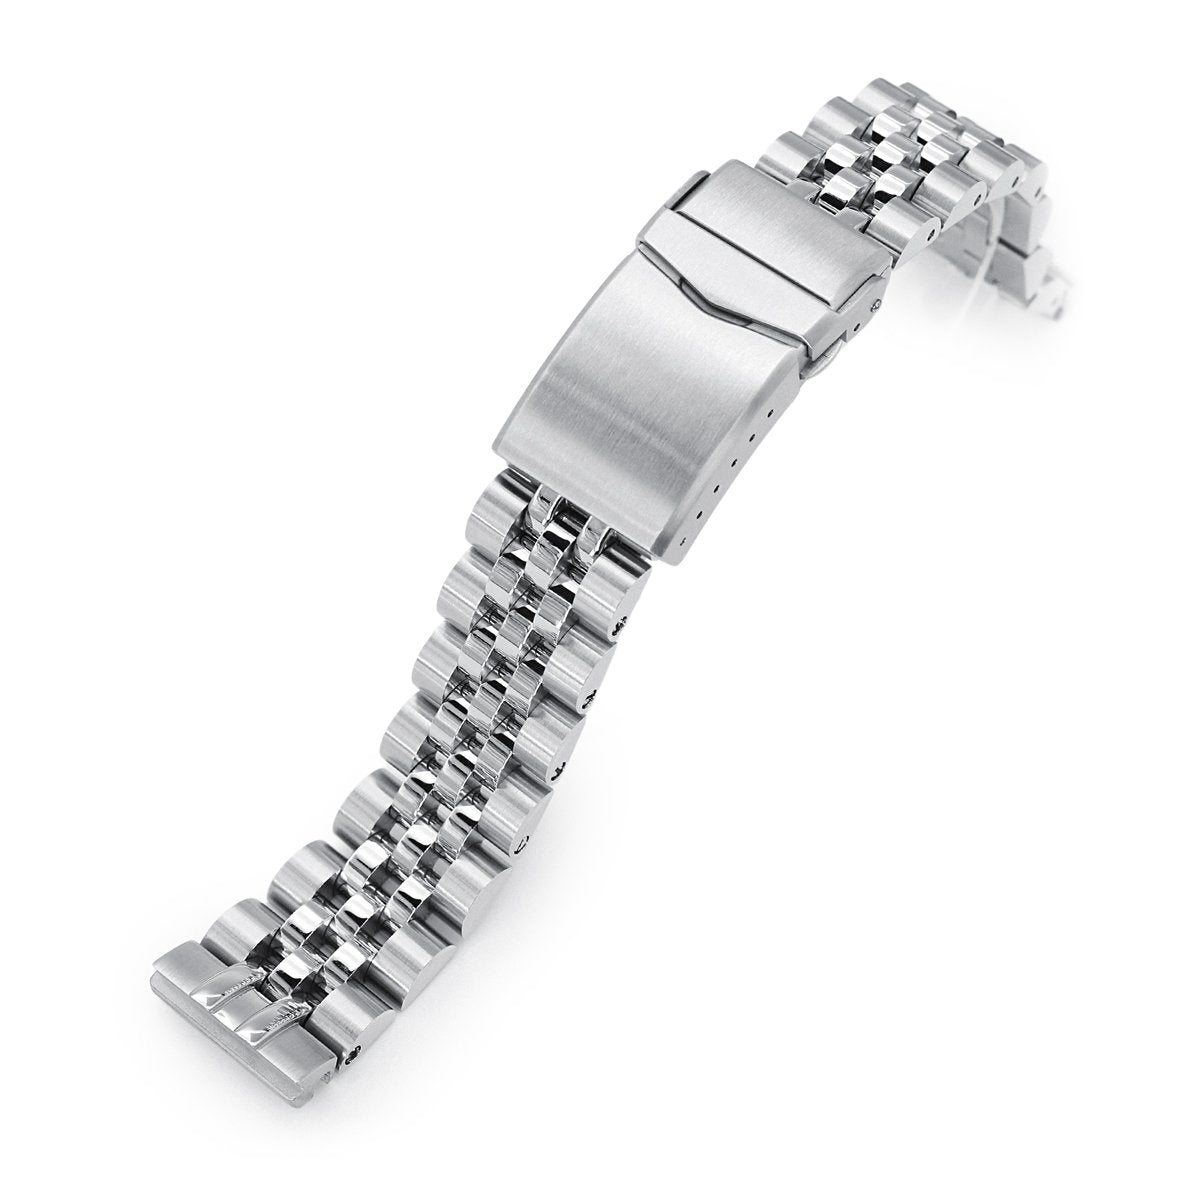 20mm Angus-J Louis 316L Stainless Steel Watch Bracelet for Seiko SBDC053 aka modern 62MAS Strapcode Watch Bands